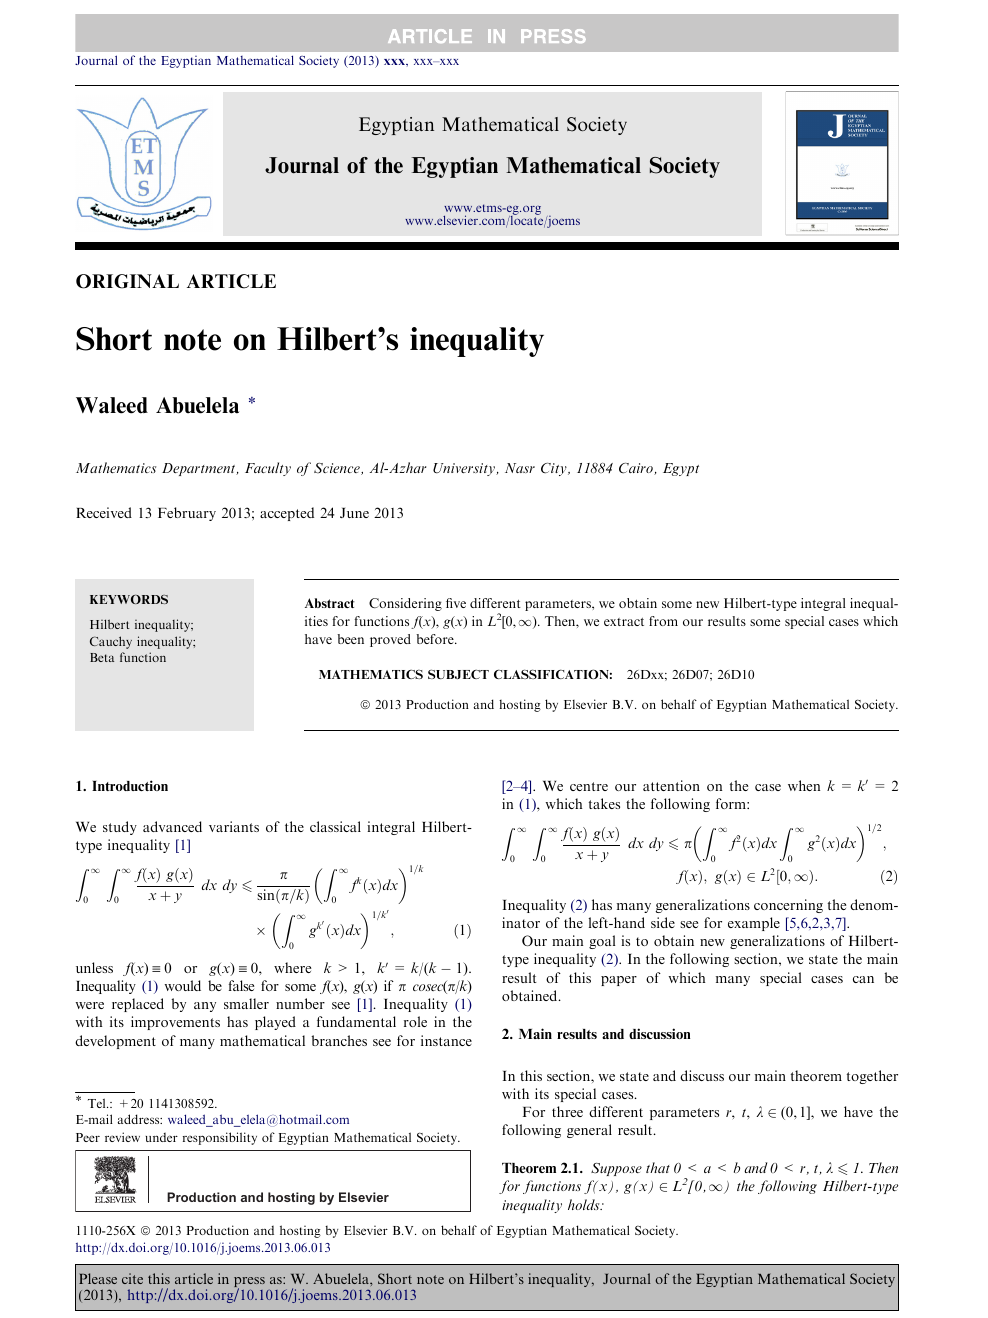 Short Note On Hilbert S Inequality Topic Of Research Paper In Mathematics Download Scholarly Article Pdf And Read For Free On Cyberleninka Open Science Hub